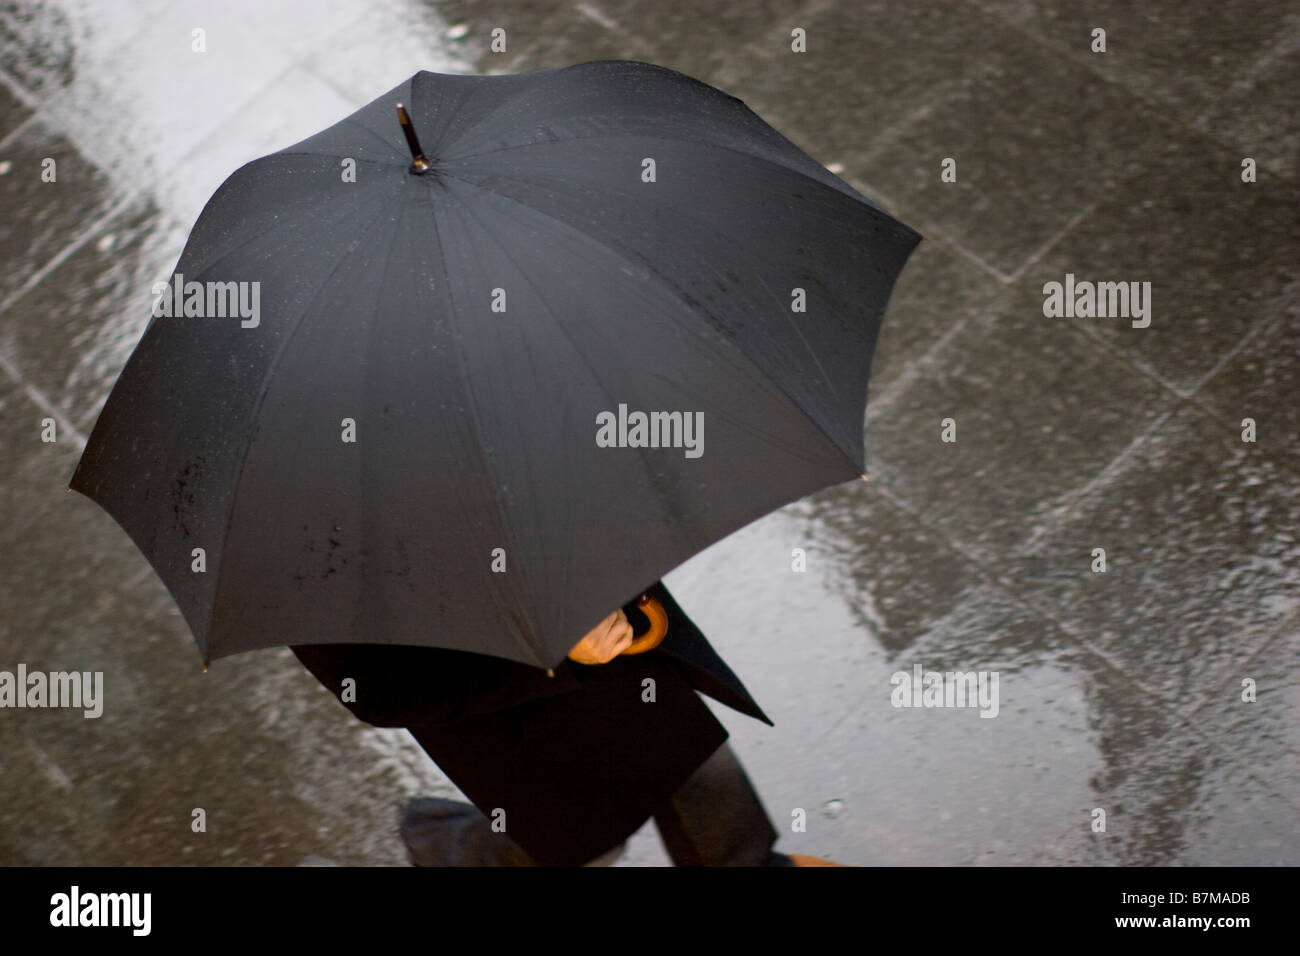 Rain in London financial district man with umbrella on gloomy London morning in rush hour Stock Photo